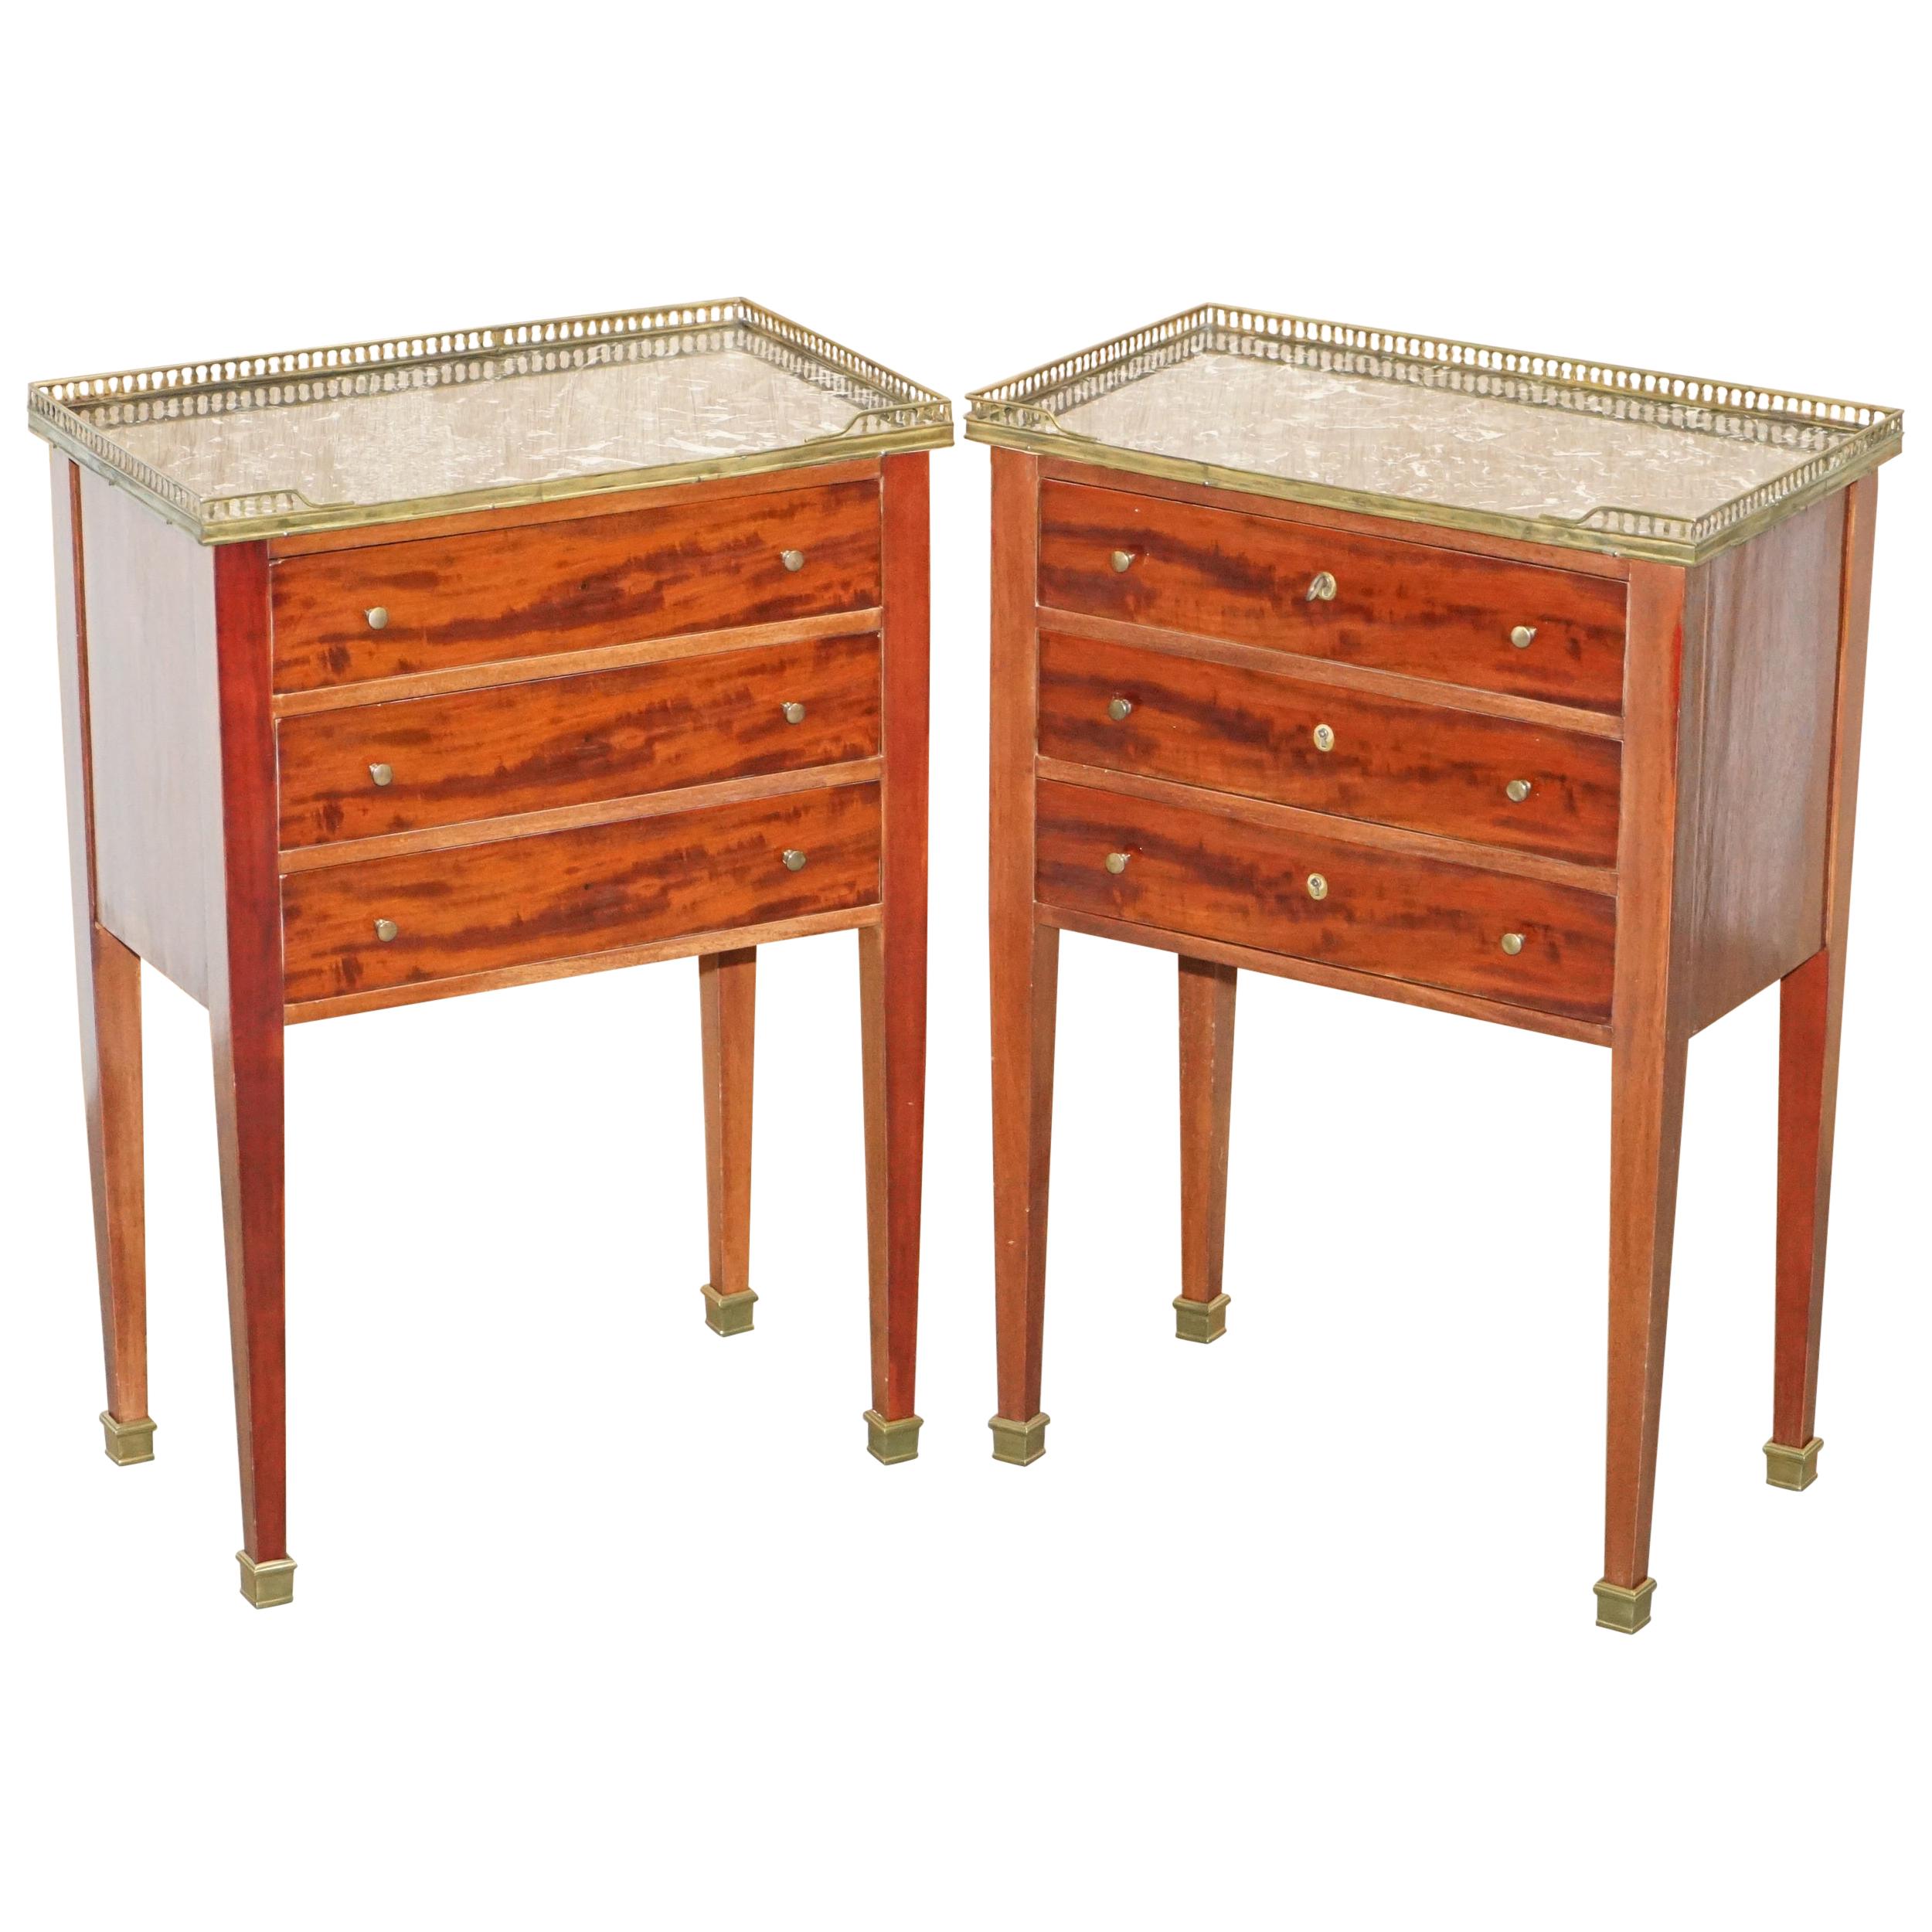 Pair of Neoclassical Cuban Hardwood Marble Topped Brass Gallery Rail Side Tables